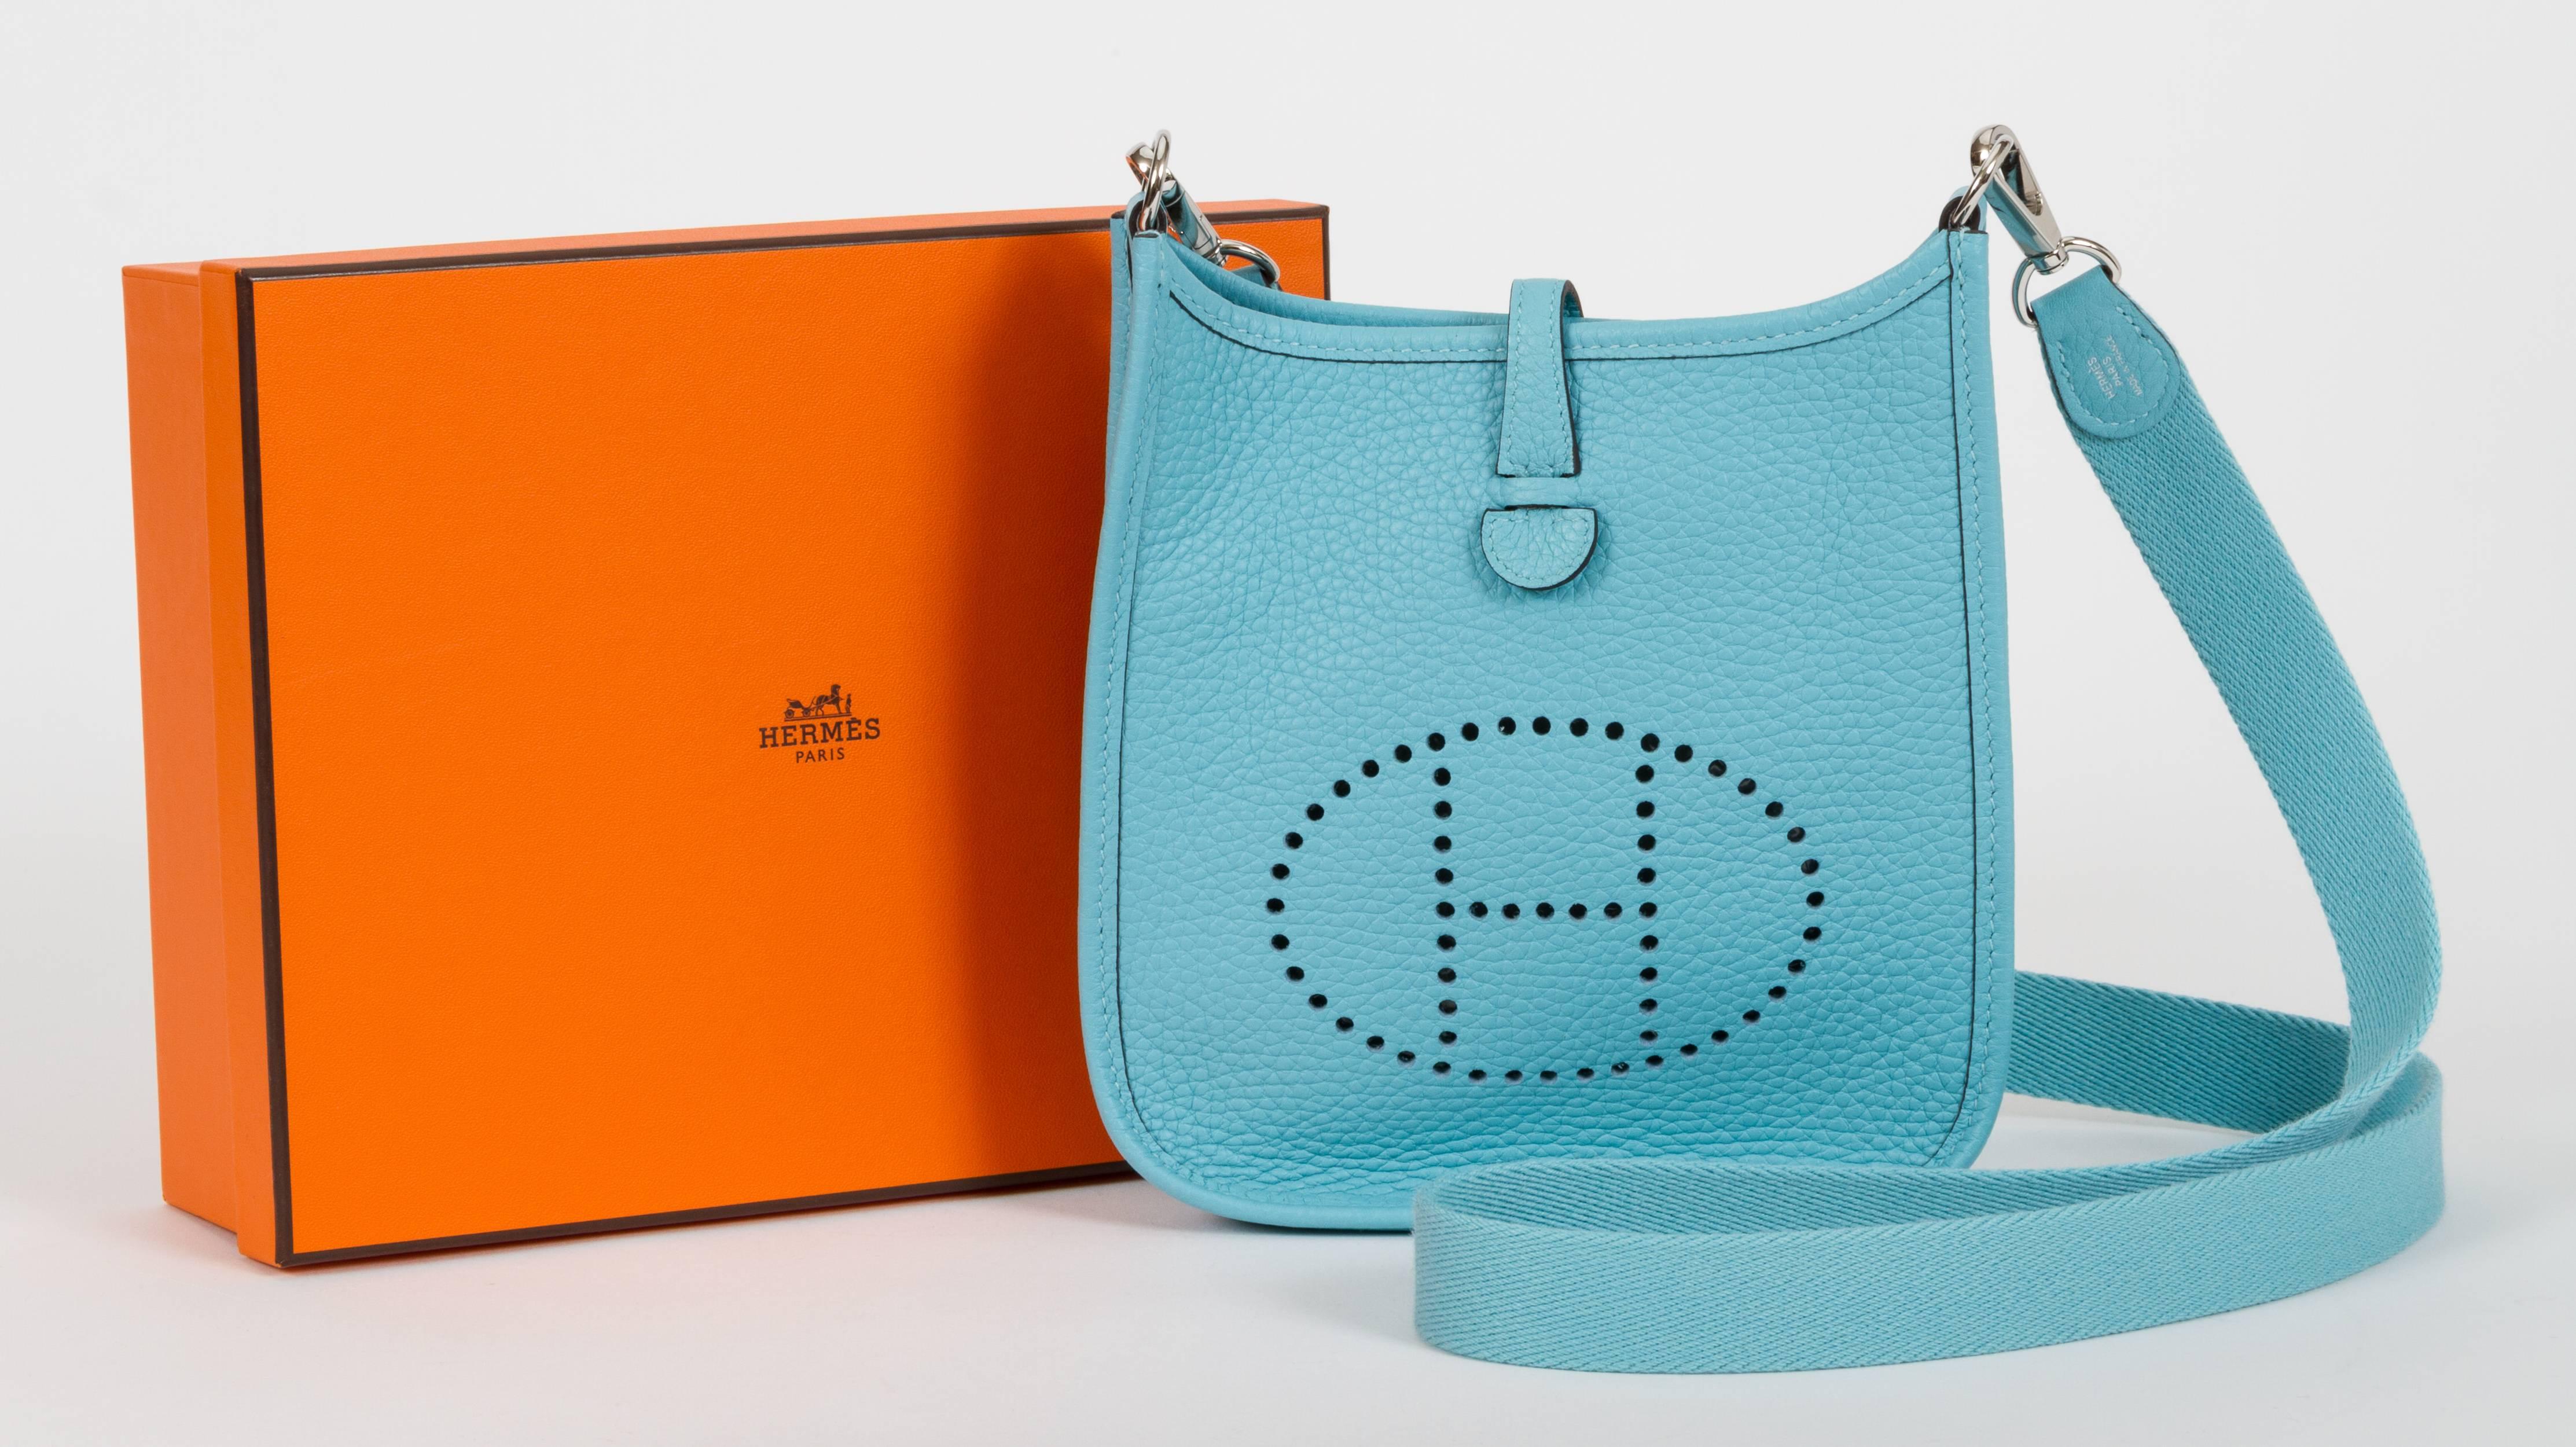 Hermès mini evelyne in blue atolle clemence leather with palladium hardware. Crossbody fabric strap, 44